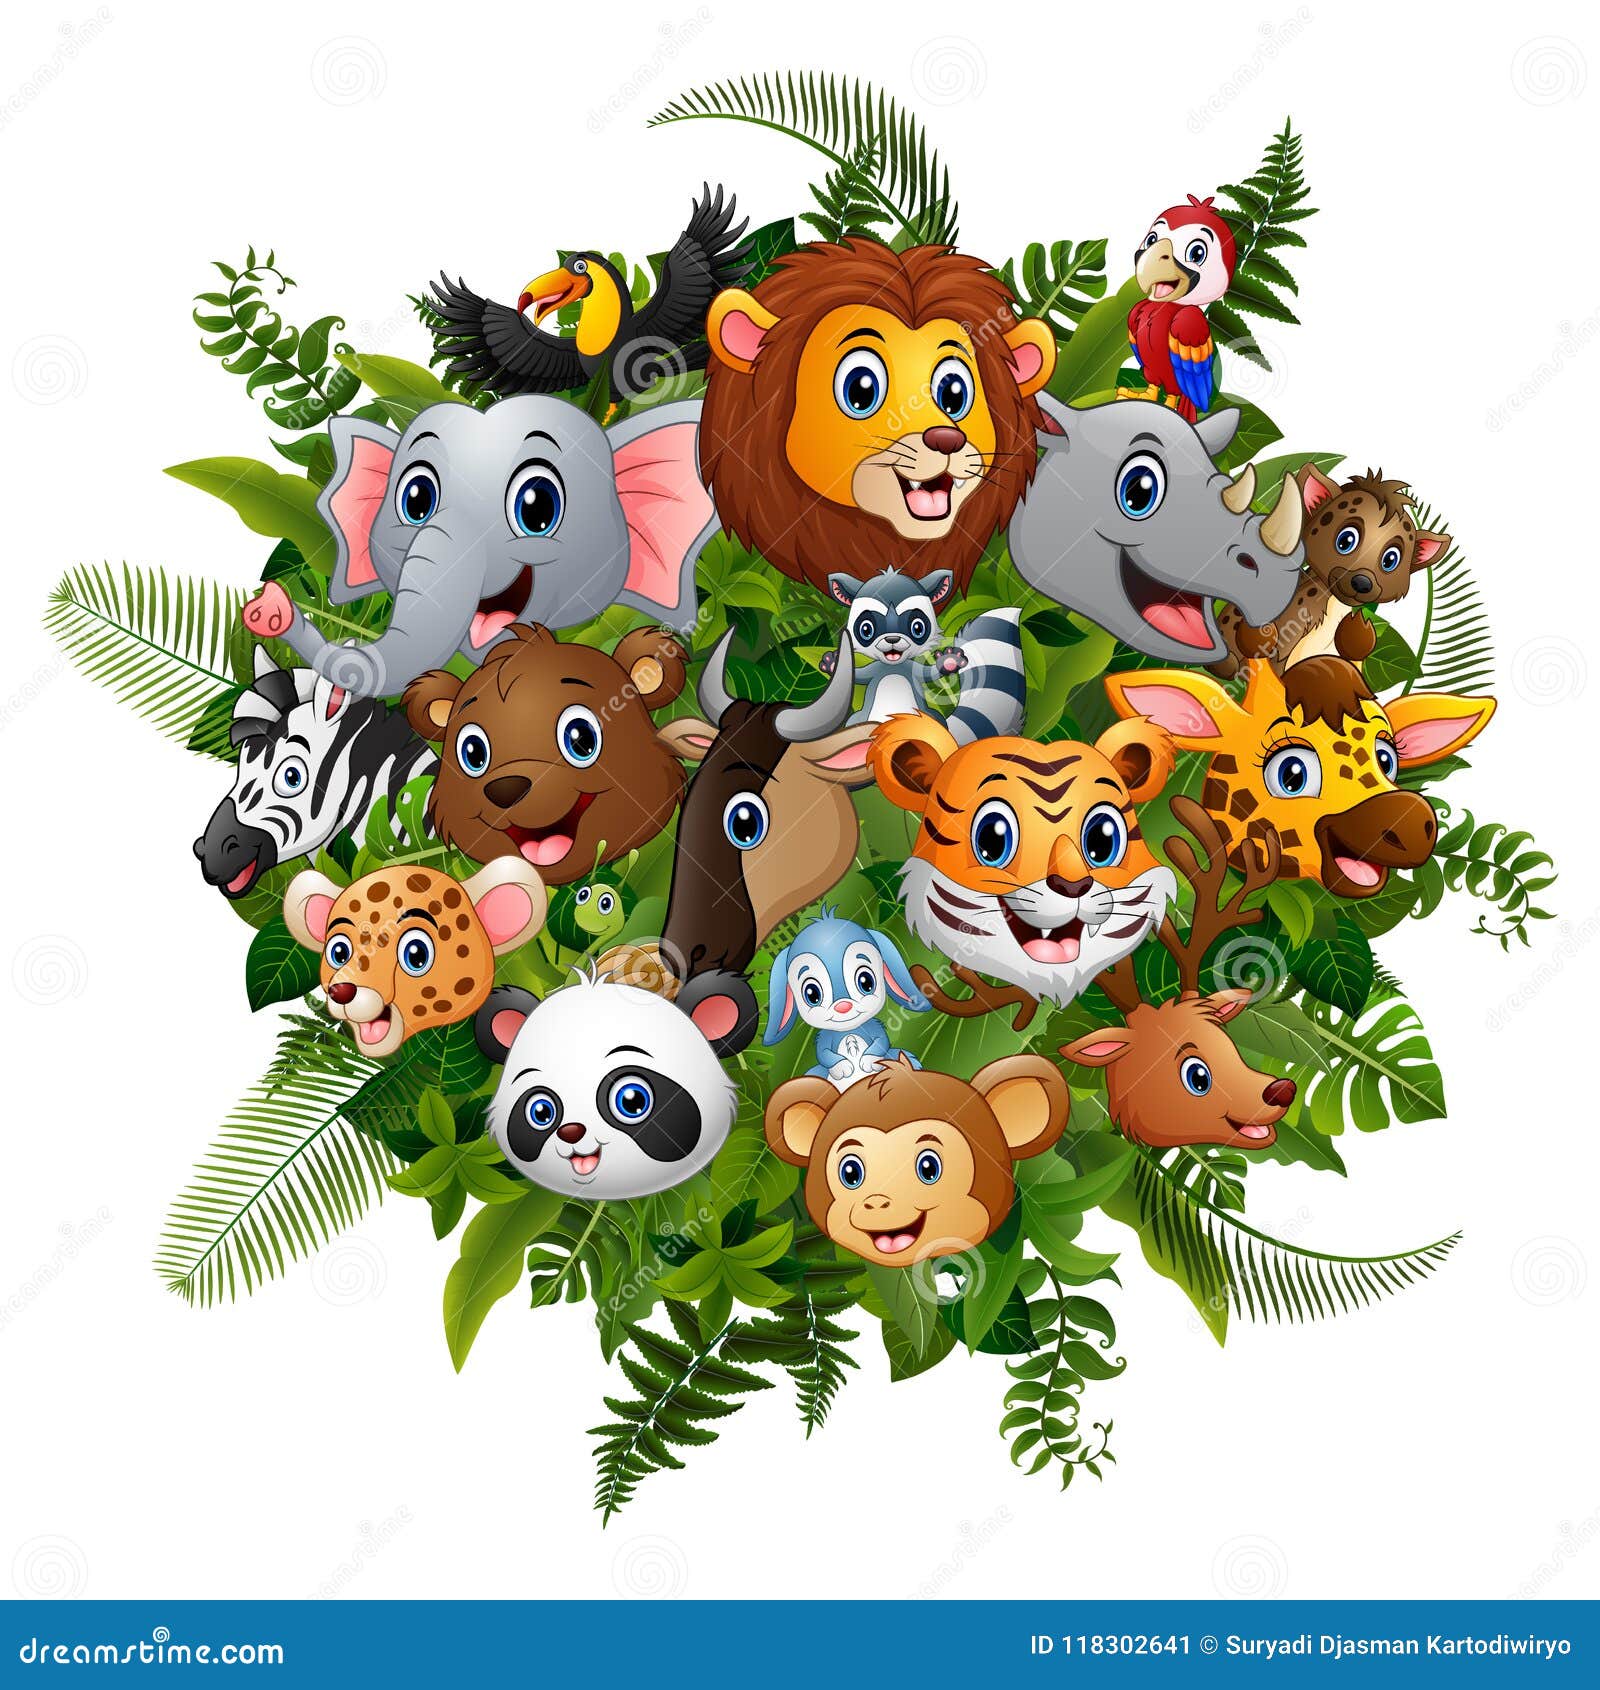 Animals Forest Cartoon Meet Together Stock Vector - Illustration of nature,  monkey: 118302641